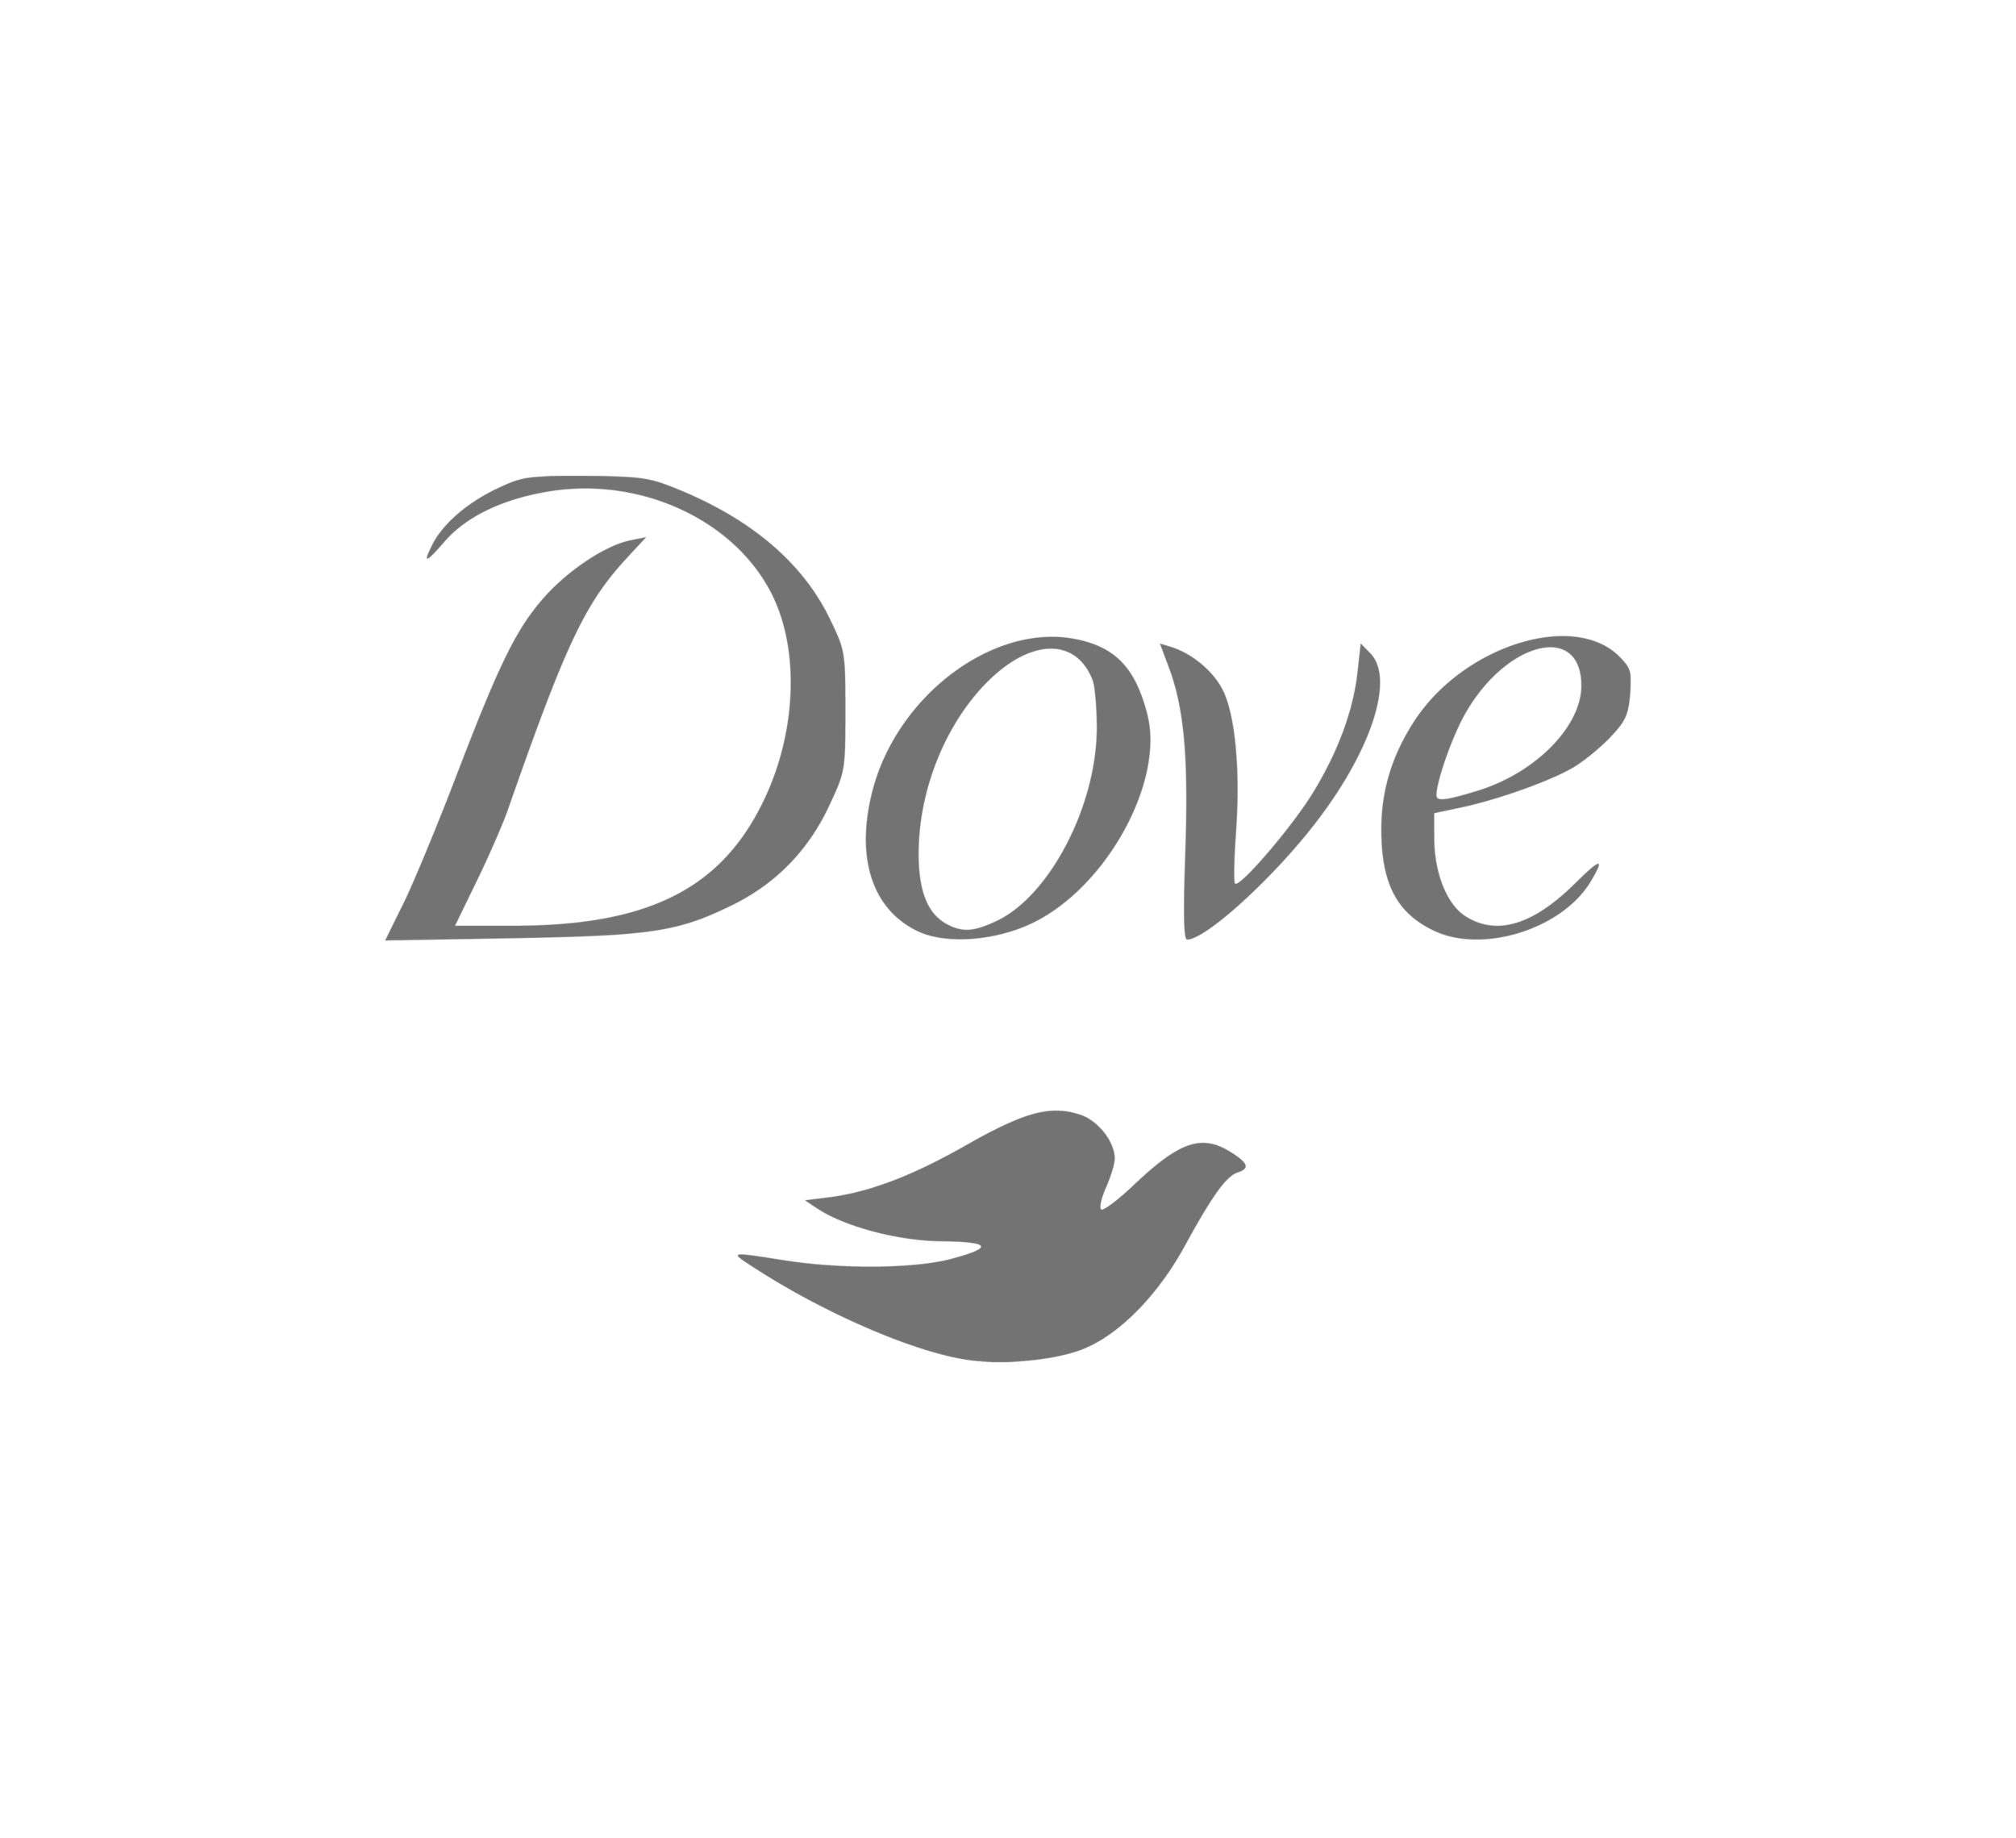 Dove-Grey2.png